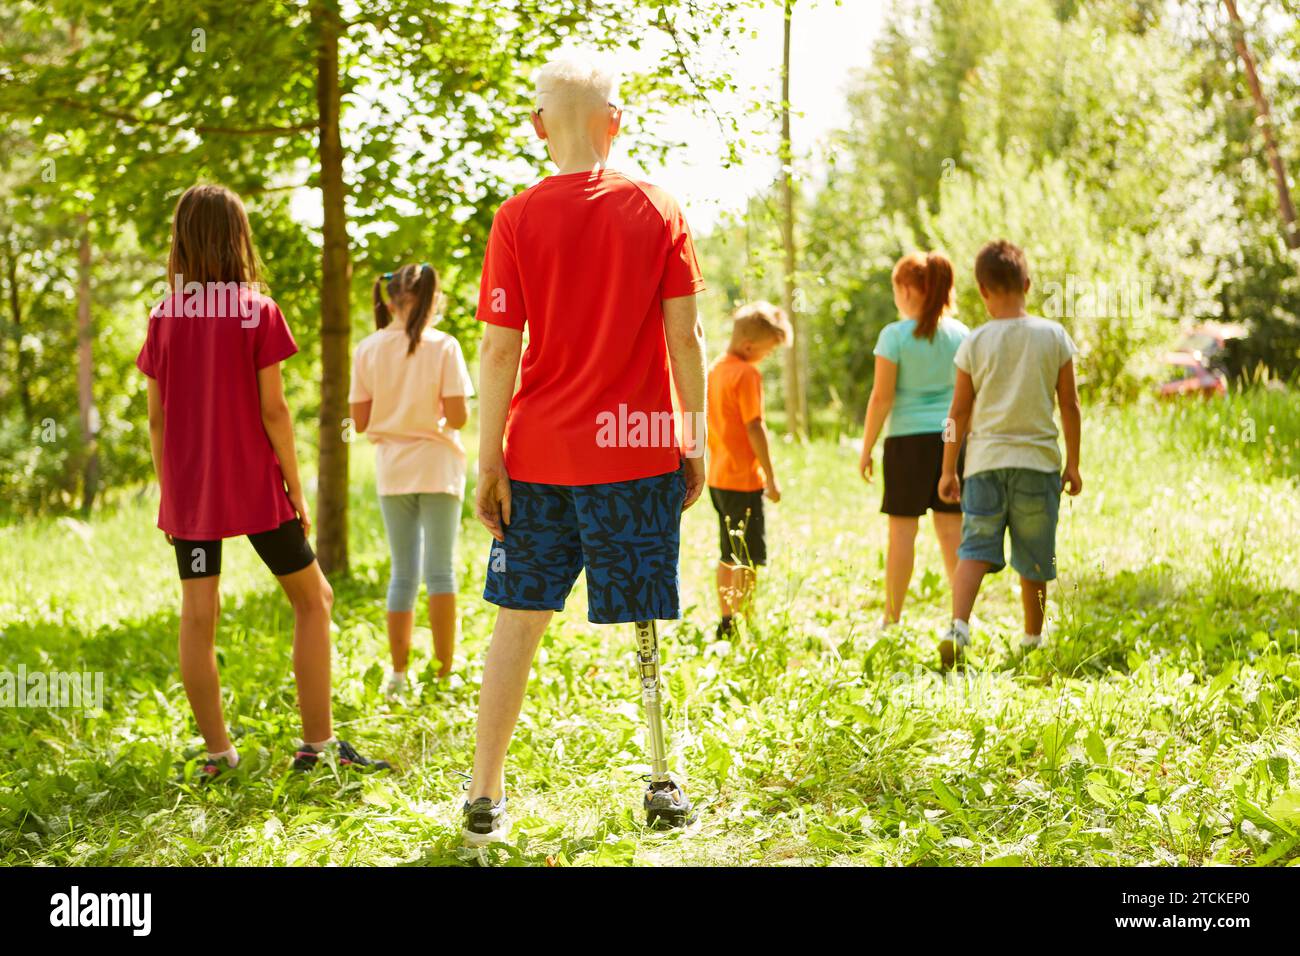 Rear view full length of disabled boy standing with friends at park Stock Photo